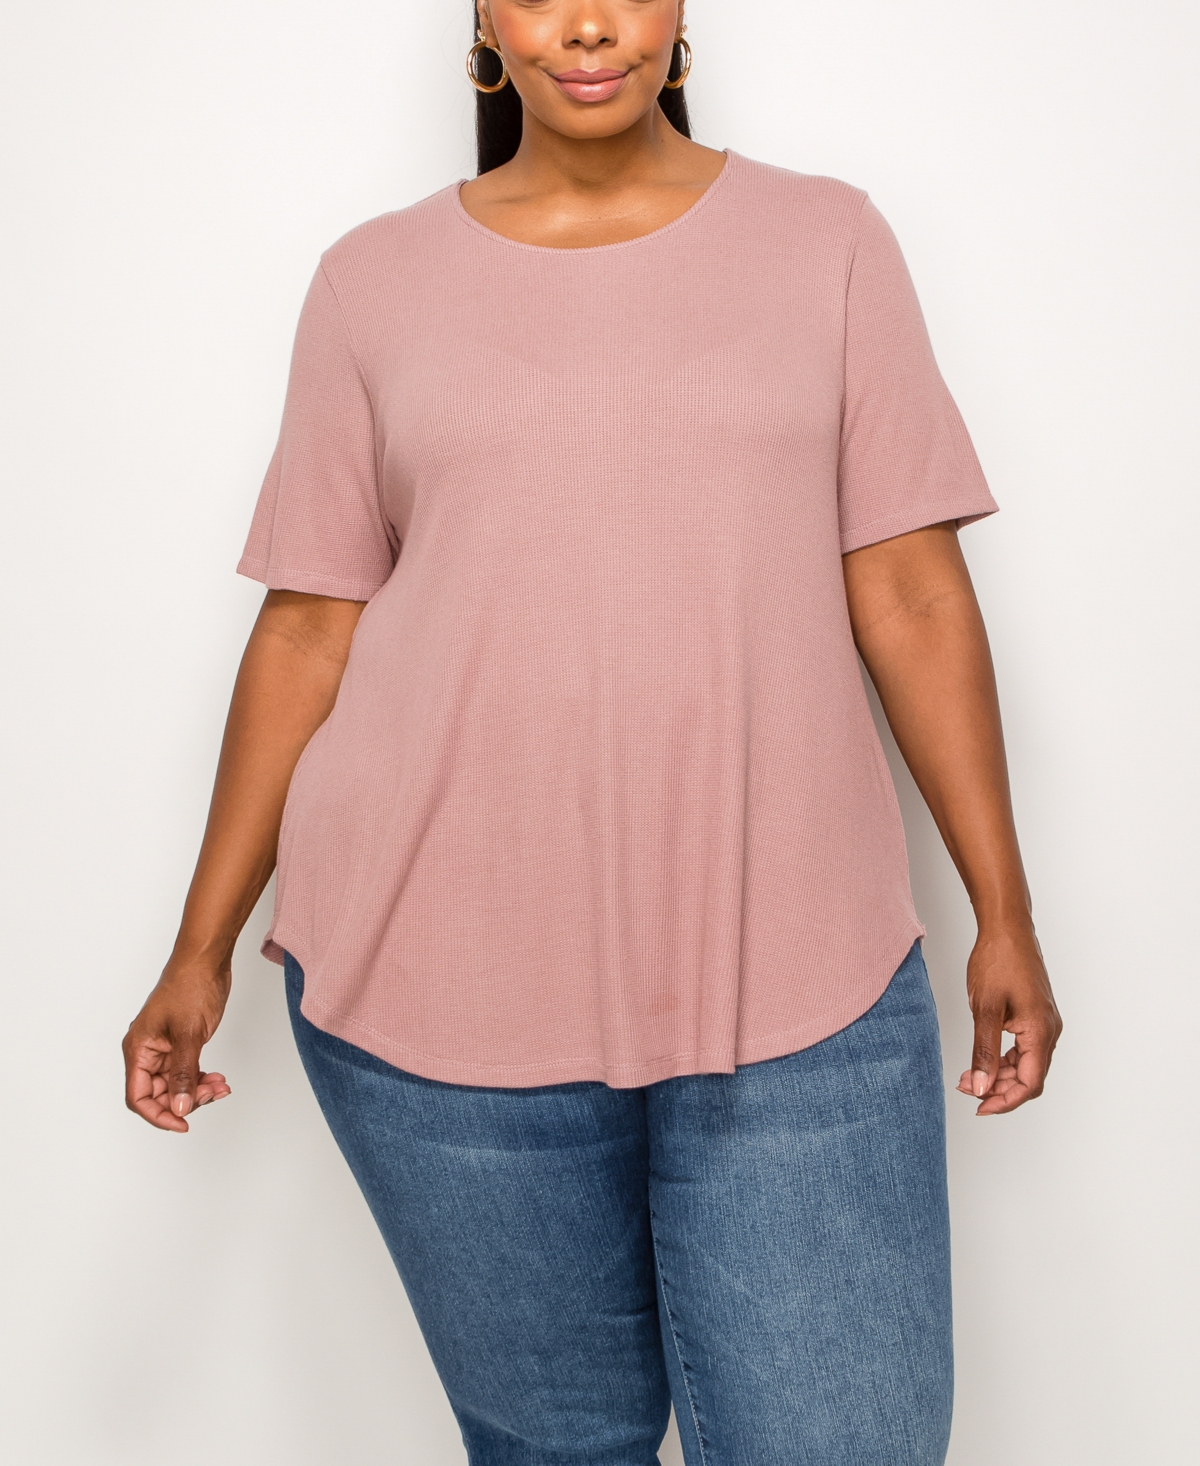 Plus Size Thermal Short Sleeve Swing Tee - Gray